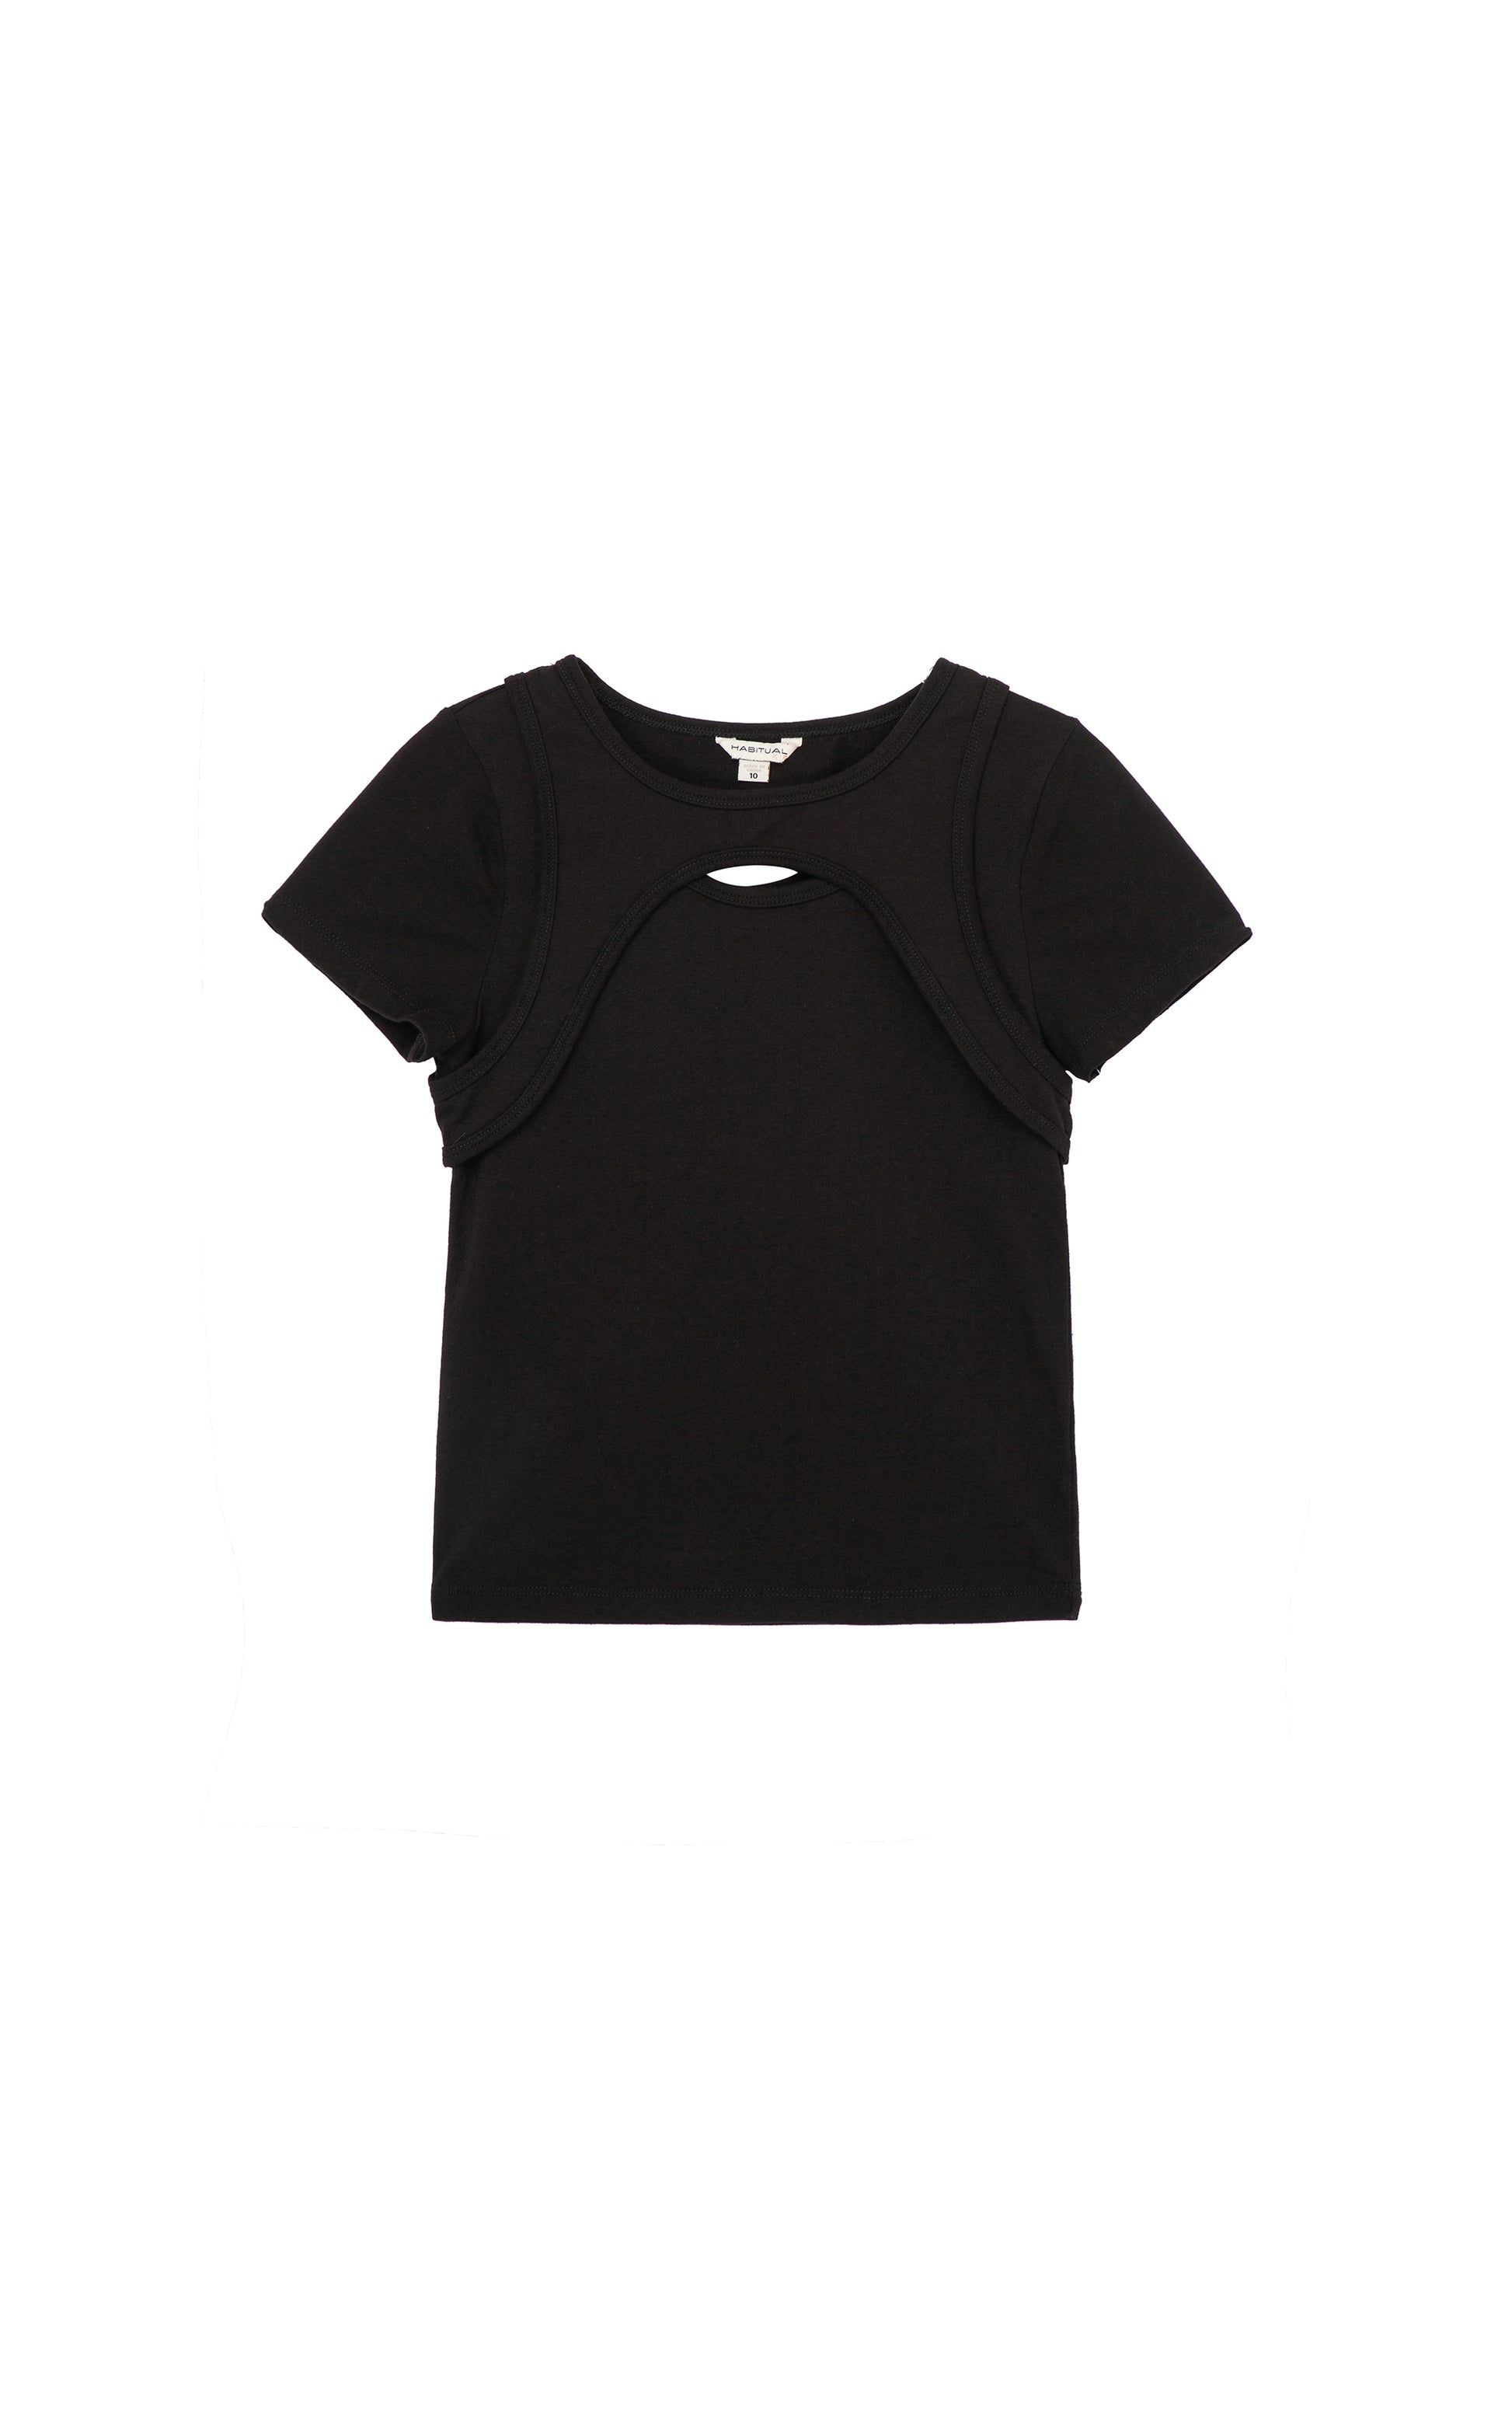 BLACK SHORT SLEEVE TOP WITH A SMALL KEYHOLE CUT-OUT AT THE UPPER BODICE